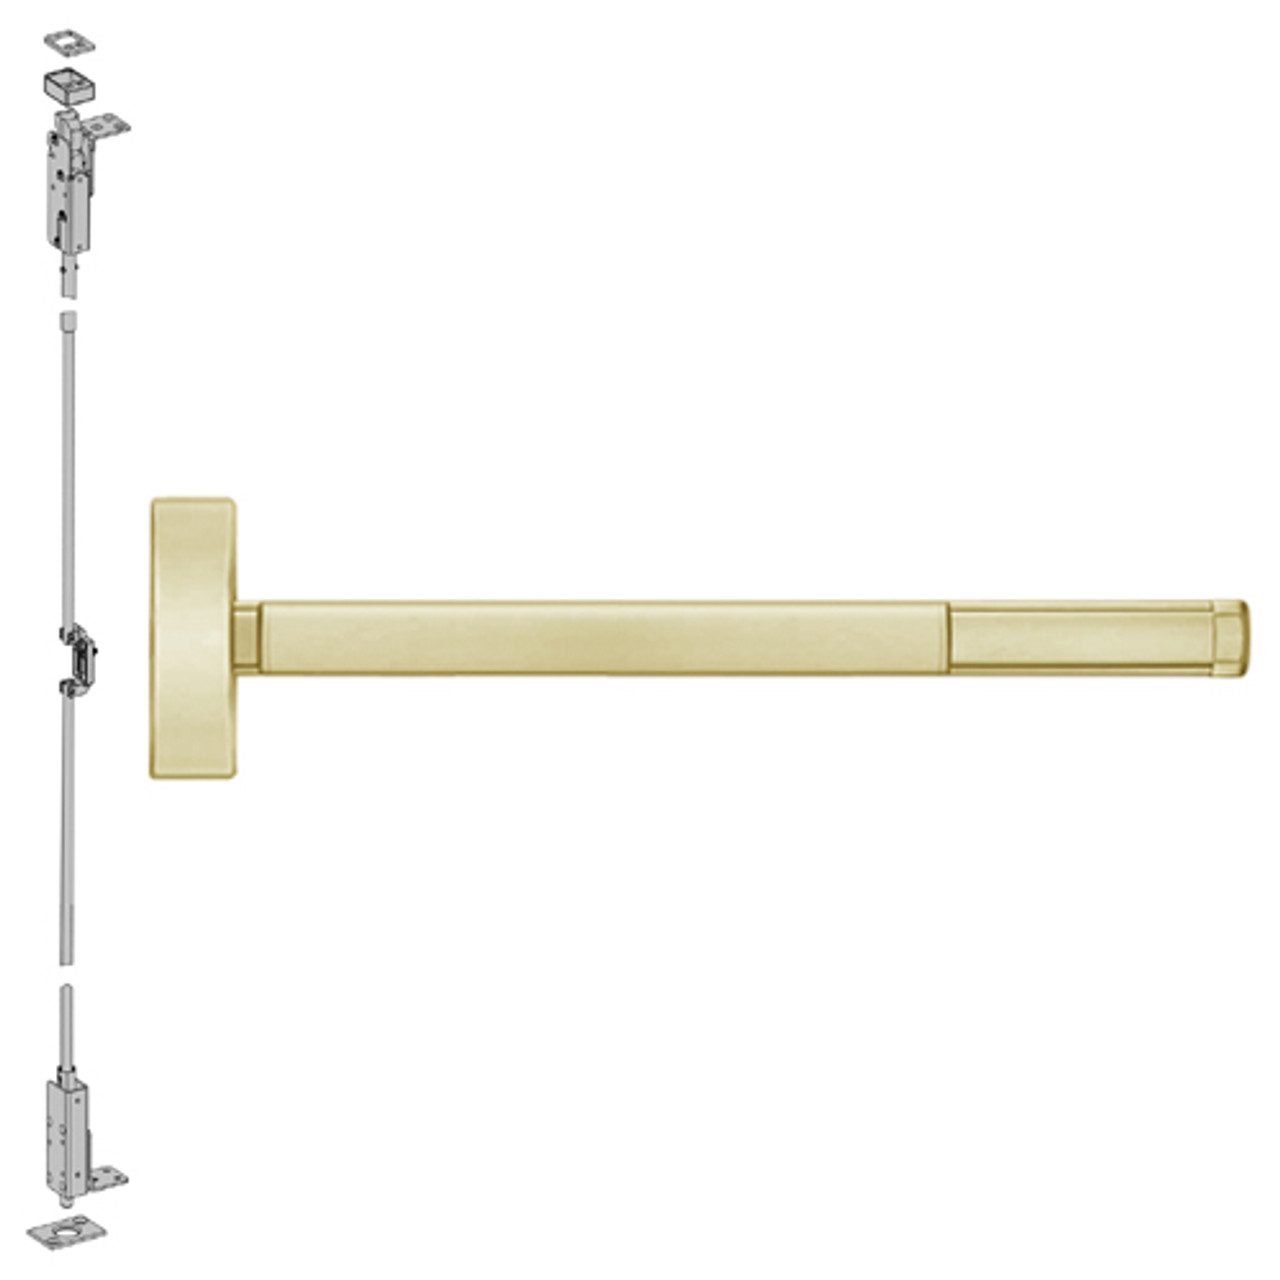 DEFL2701-606-36 PHI 2700 Series Fire Rated Wood Door Concealed Vertical Exit Device with Delayed Egress Prepped for Cover Plate in Satin Brass Finish